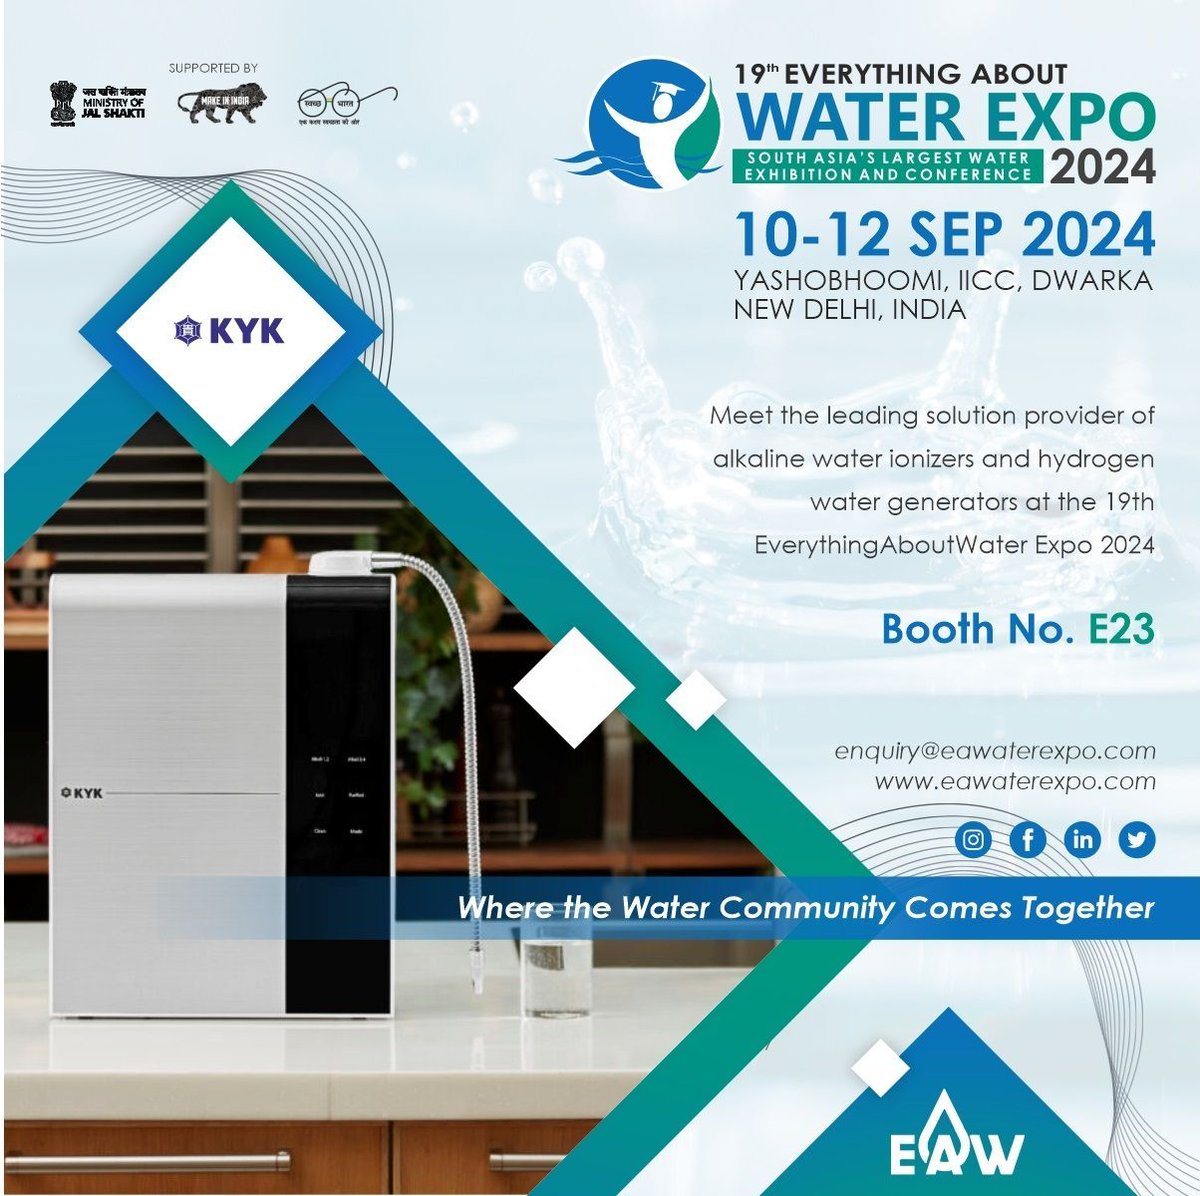 Discover the future of #hydration with KYK Corp India! 

Join them at Booth No. E23 at the EA Water Expo from 10-12 Sept 2024 at Yashobhoomi, IICC, New Delhi

Register now buff.ly/4aiGPZp

#EverythingAboutWaterExpo #KYKCorpIndia #AlkalineWater #HydrogenWater @@kykkorea